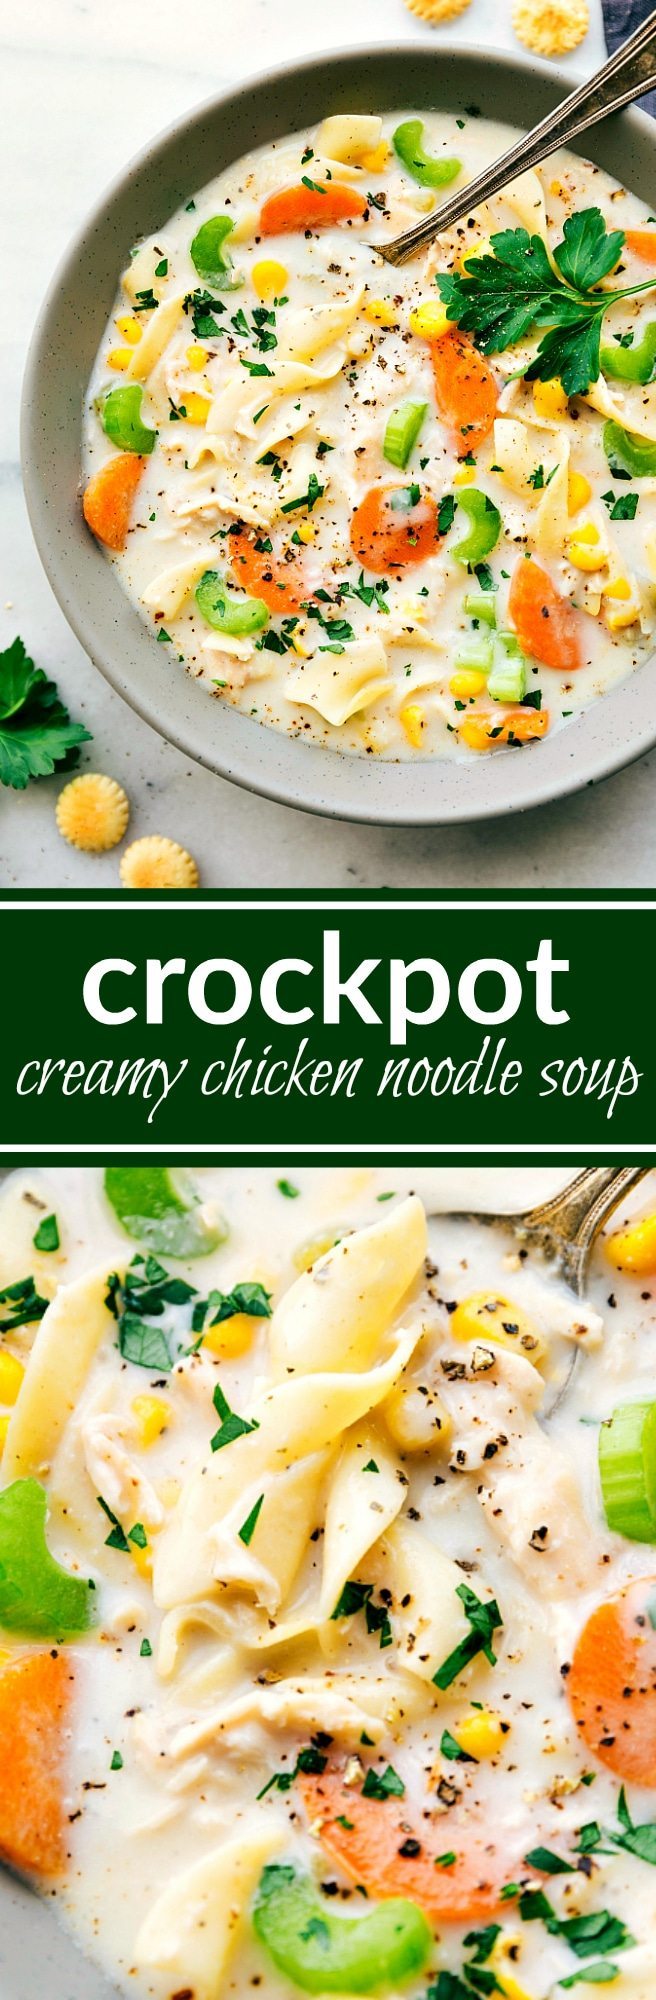 CROCKPOT Creamy Chicken Noodle Soup! Packed with flavor and so easy to make! Recipe via chelseasmessyapron.com